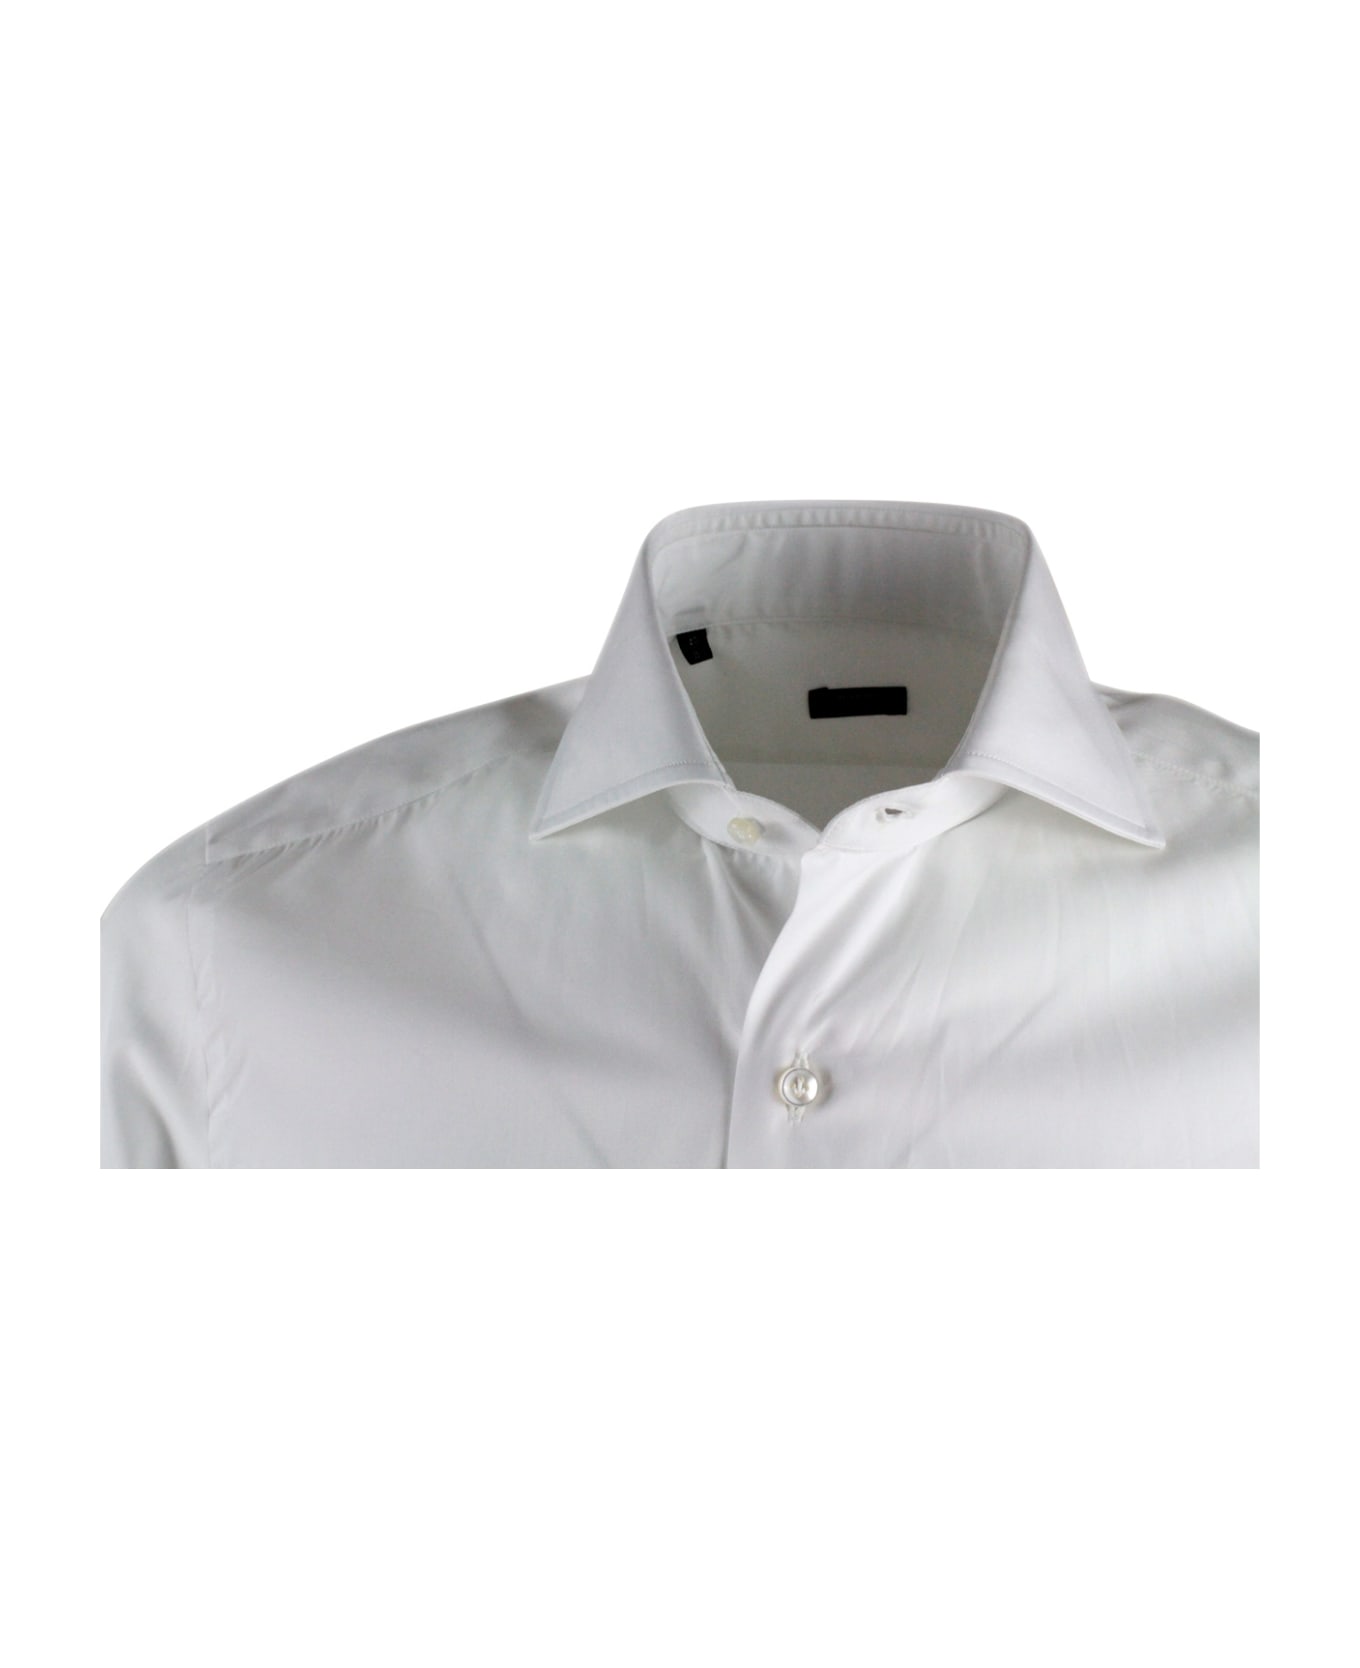 Barba Napoli Slim Fit Shirt In Fine Stretch Cotton, Italian Collar, Hand-stitched Black Label And Mother-of-pearl Buttons - White シャツ